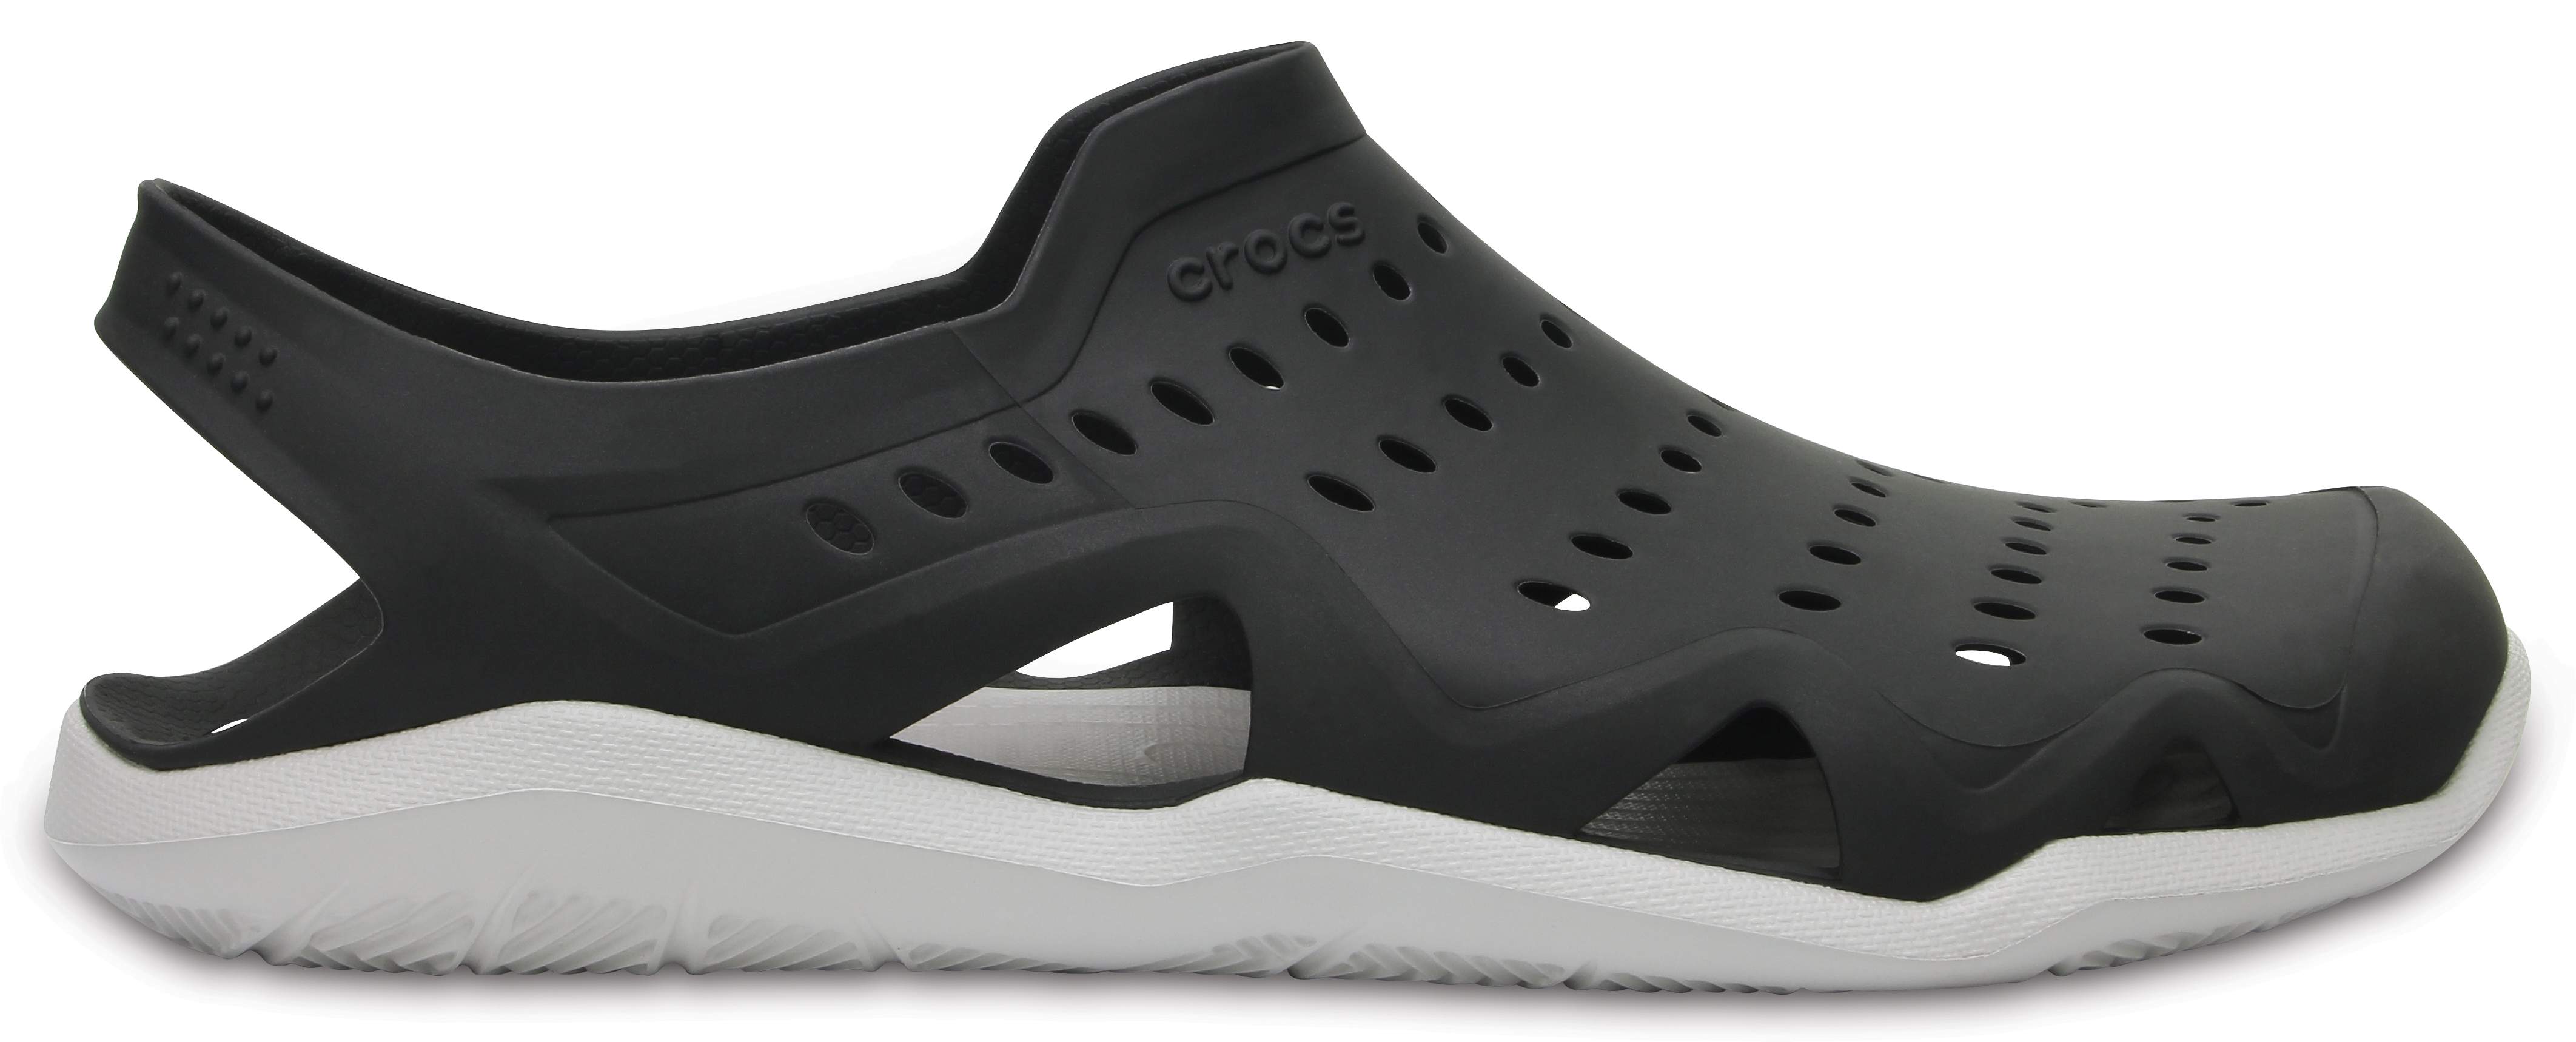 crocs swiftwater wave review